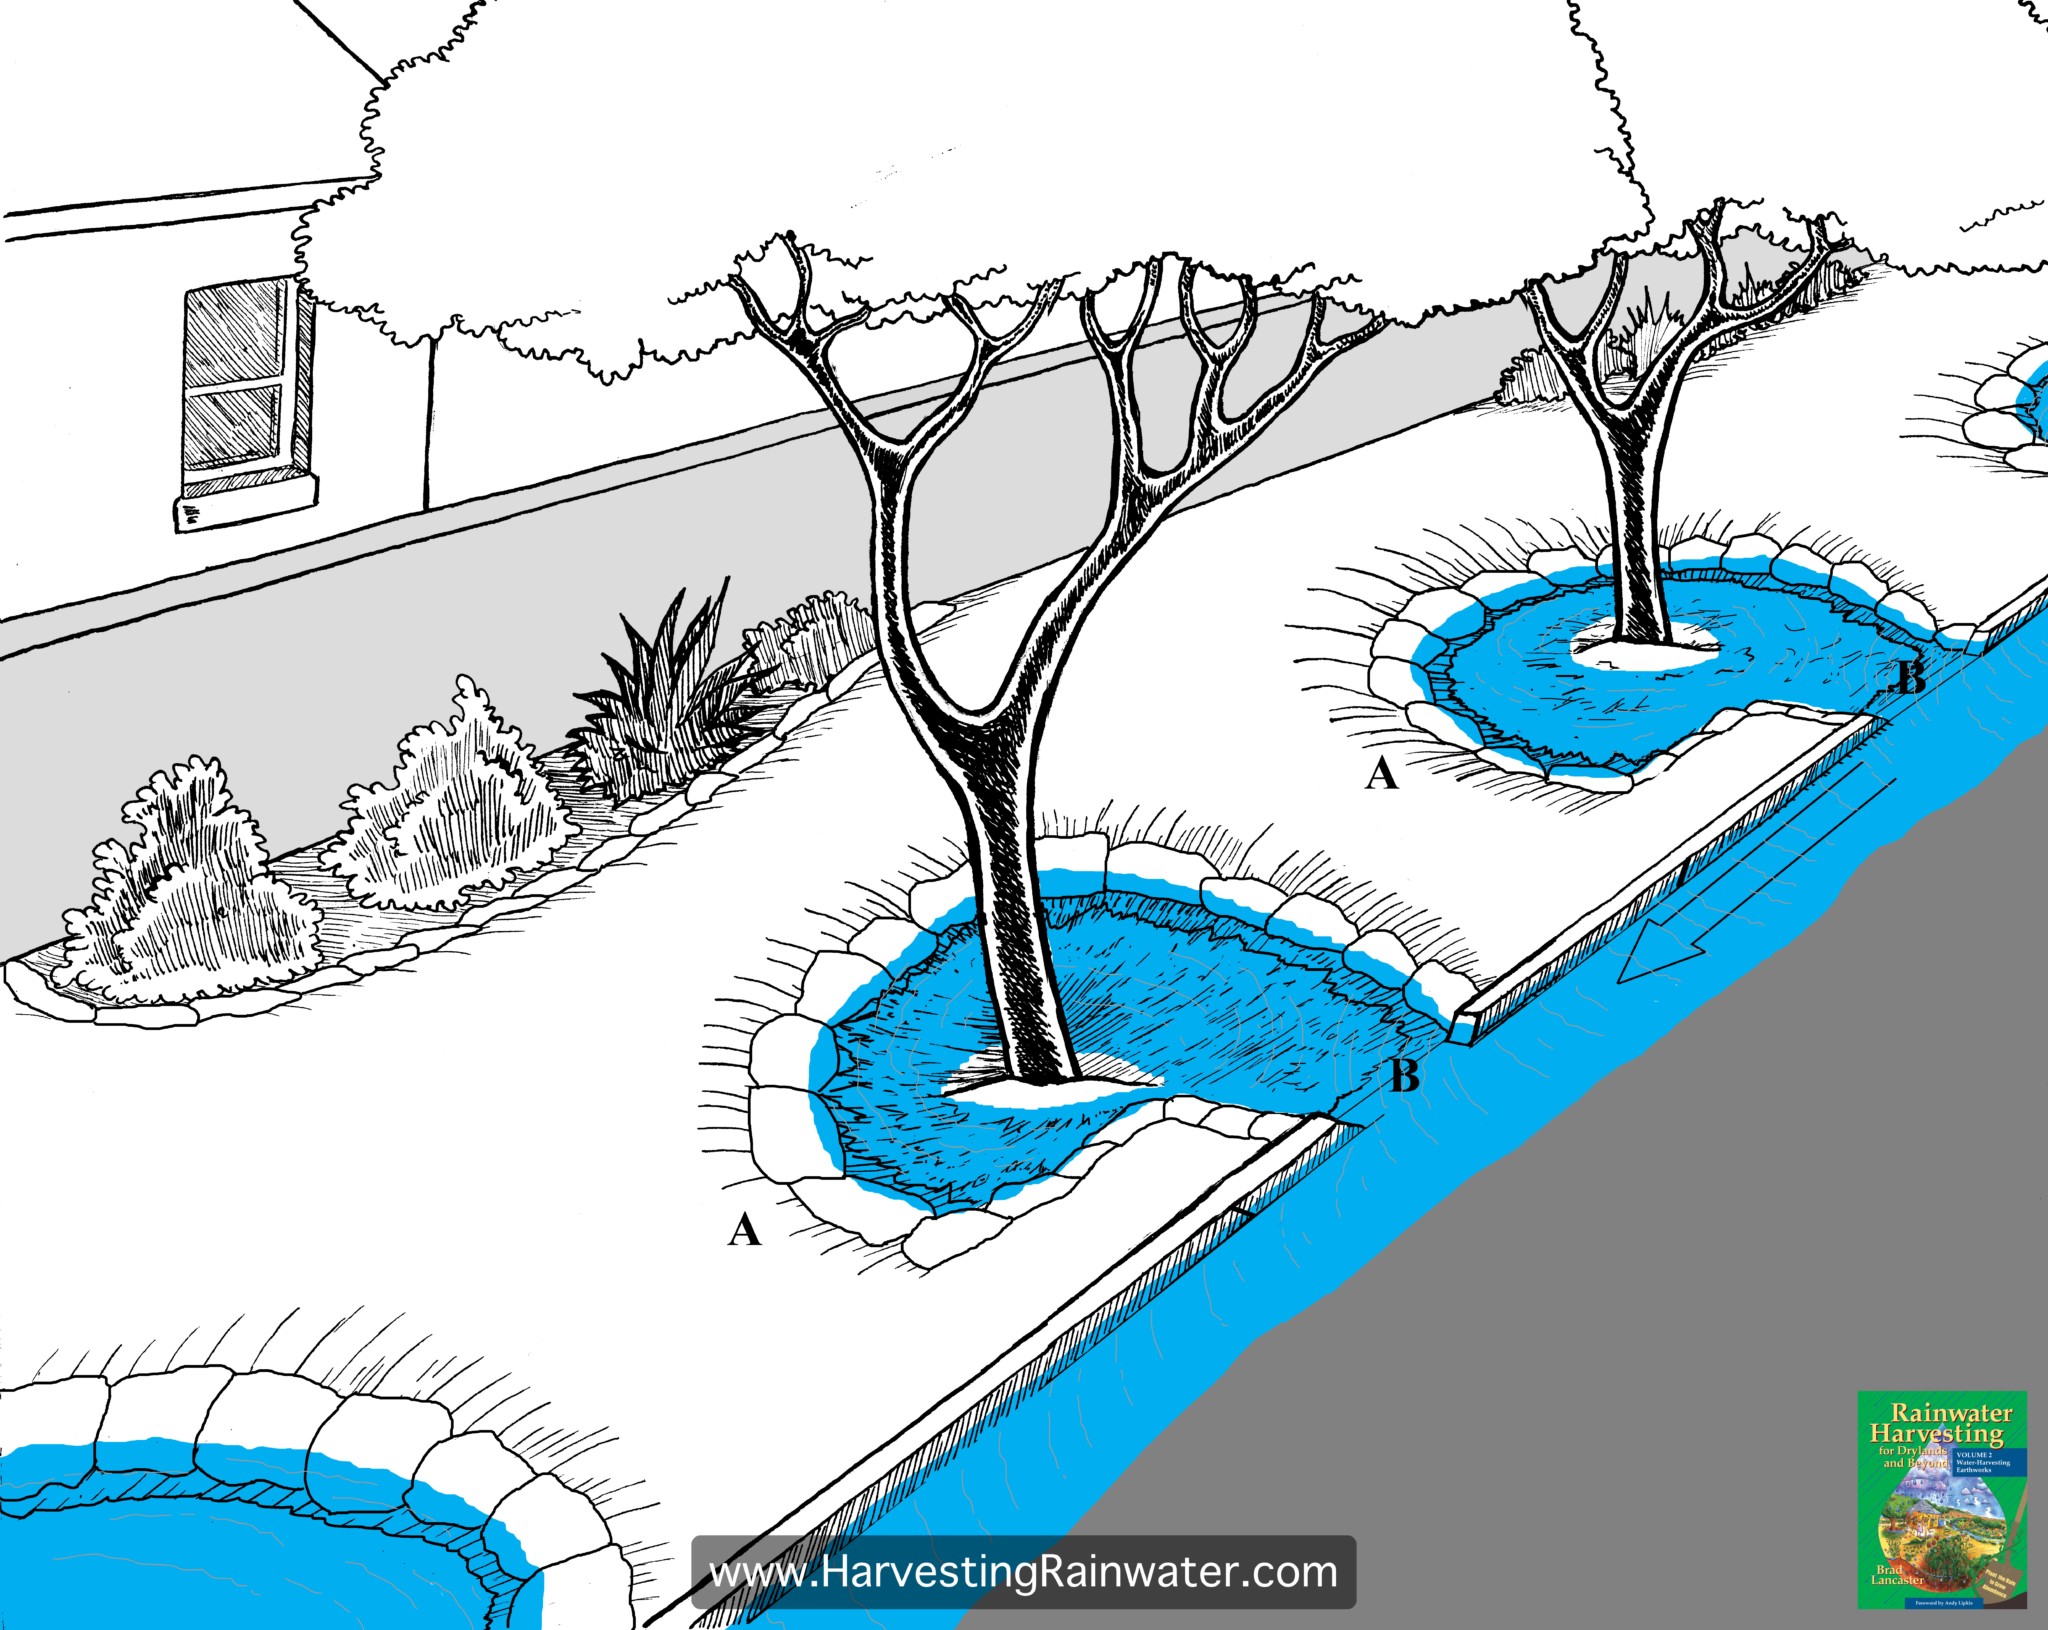 Fig. 1. Eddy or backwater basins. The upper edge of the farthest-downstream section of the basin (A) must be higher (ideally at least 4 inches [10 cm] higher) than the basin’s curb-cut, or curb-core, inlet (B) to ensure pooling water calmly backs up to the inlet. Arrow denotes water flow.